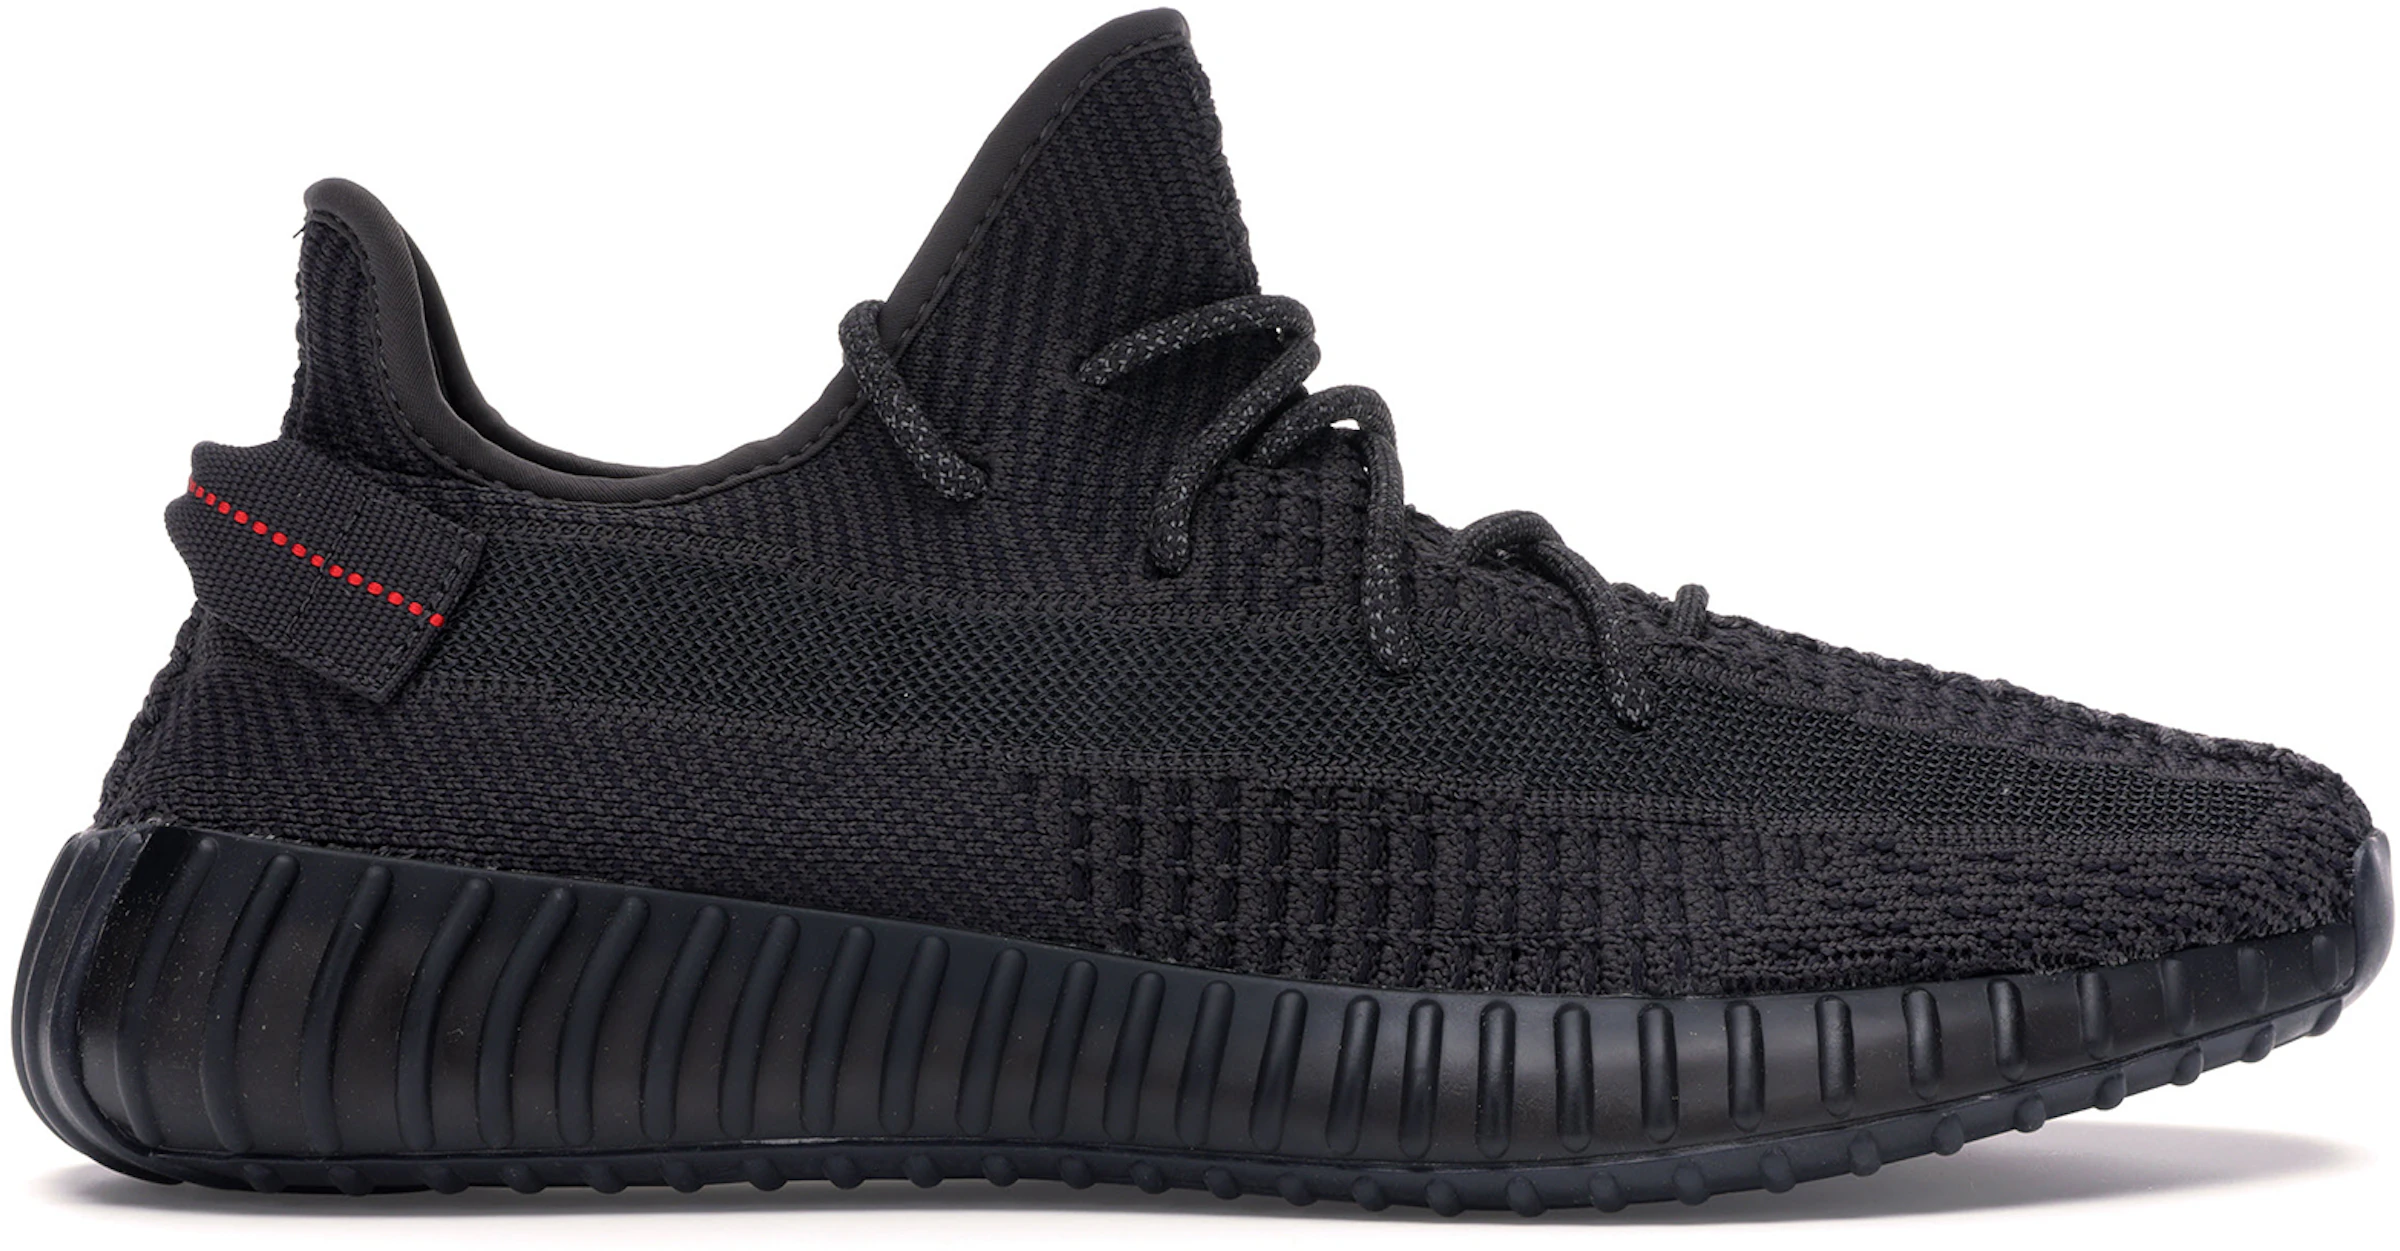 Adidas YEEZY Boost 350 V2 Black Non Reflective REVIEW On FEET | vlr.eng.br